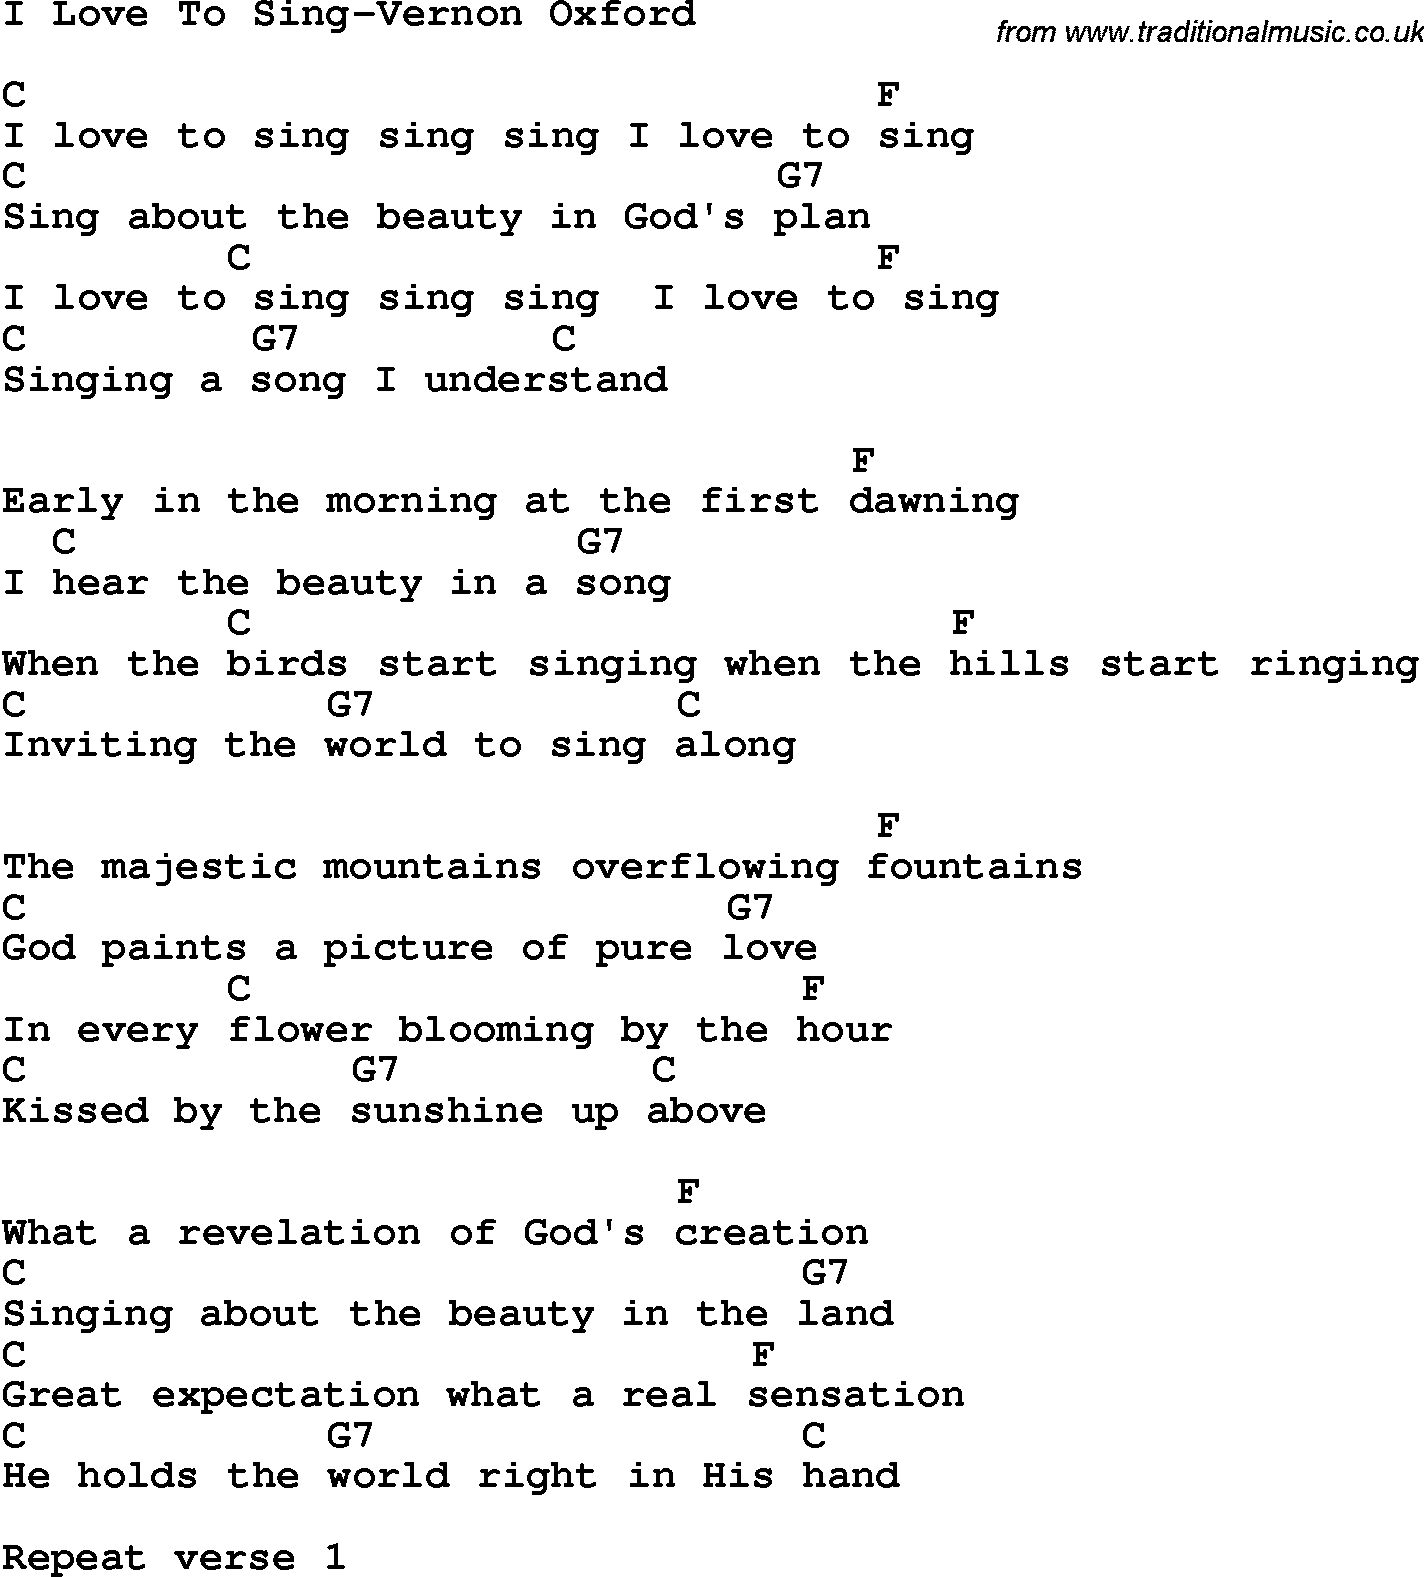 Country, Southern and Bluegrass Gospel Song I Love To Sing-Vernon Oxford lyrics and chords